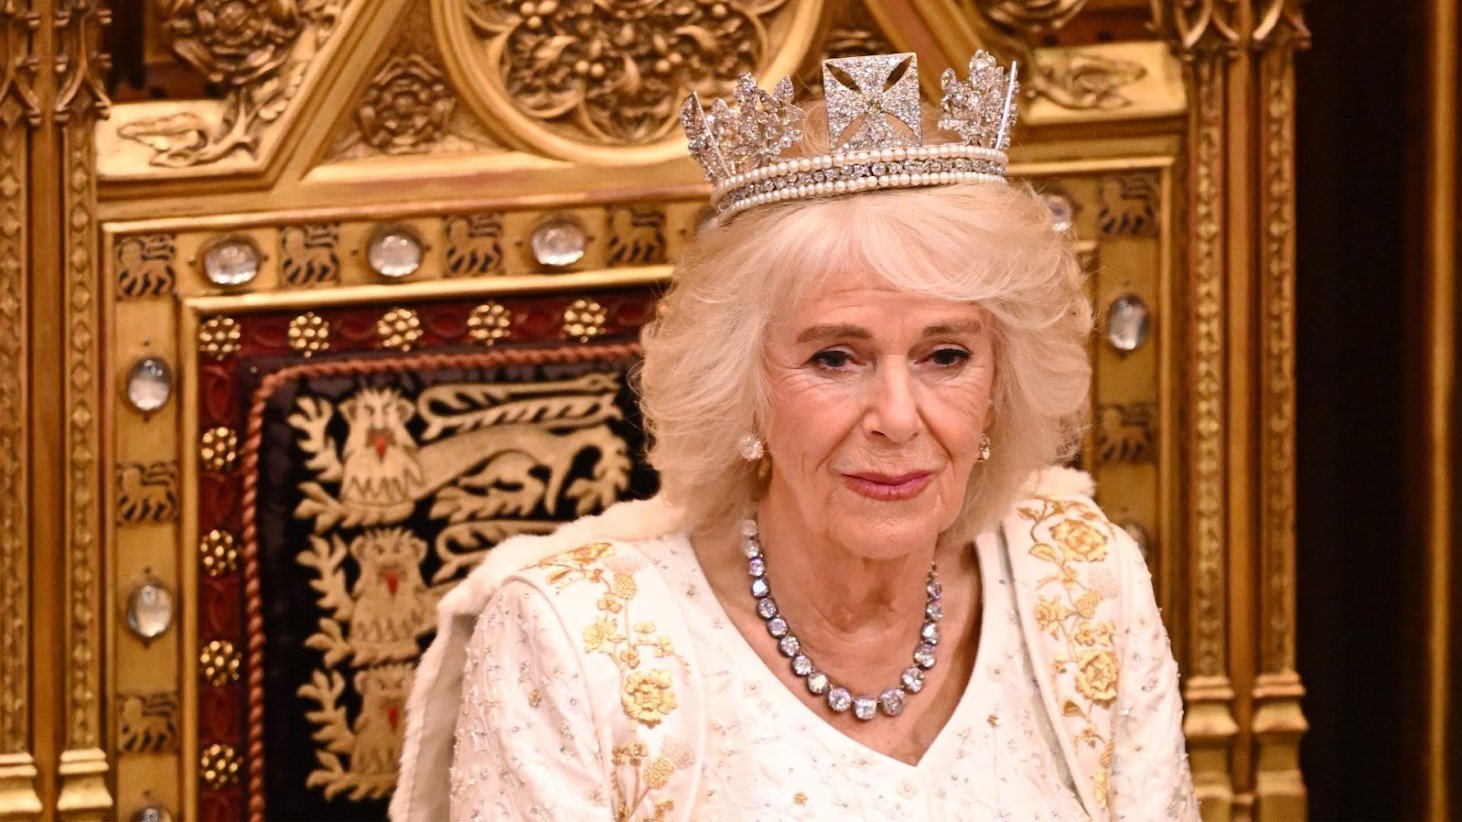 Queen Camilla is pictured wearing a ceremonial dress adorned with gold floral embroidery and a pearl necklace with sapphire accents. She dons a diamond tiara atop her white coiffed hair and is seated in front of an ornate golden backdrop with heraldic symbols